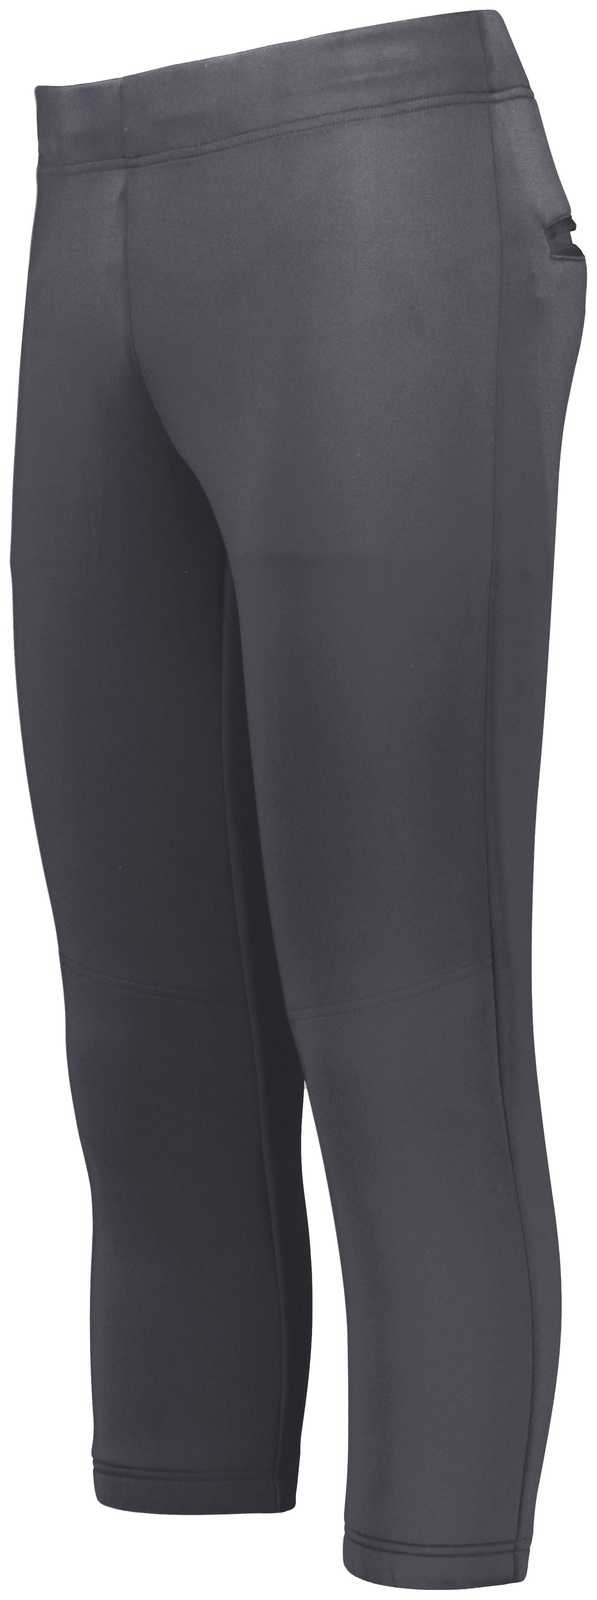 Russell R15Lsg Girls Flexstretch Softball Pant - Stealth - HIT a Double